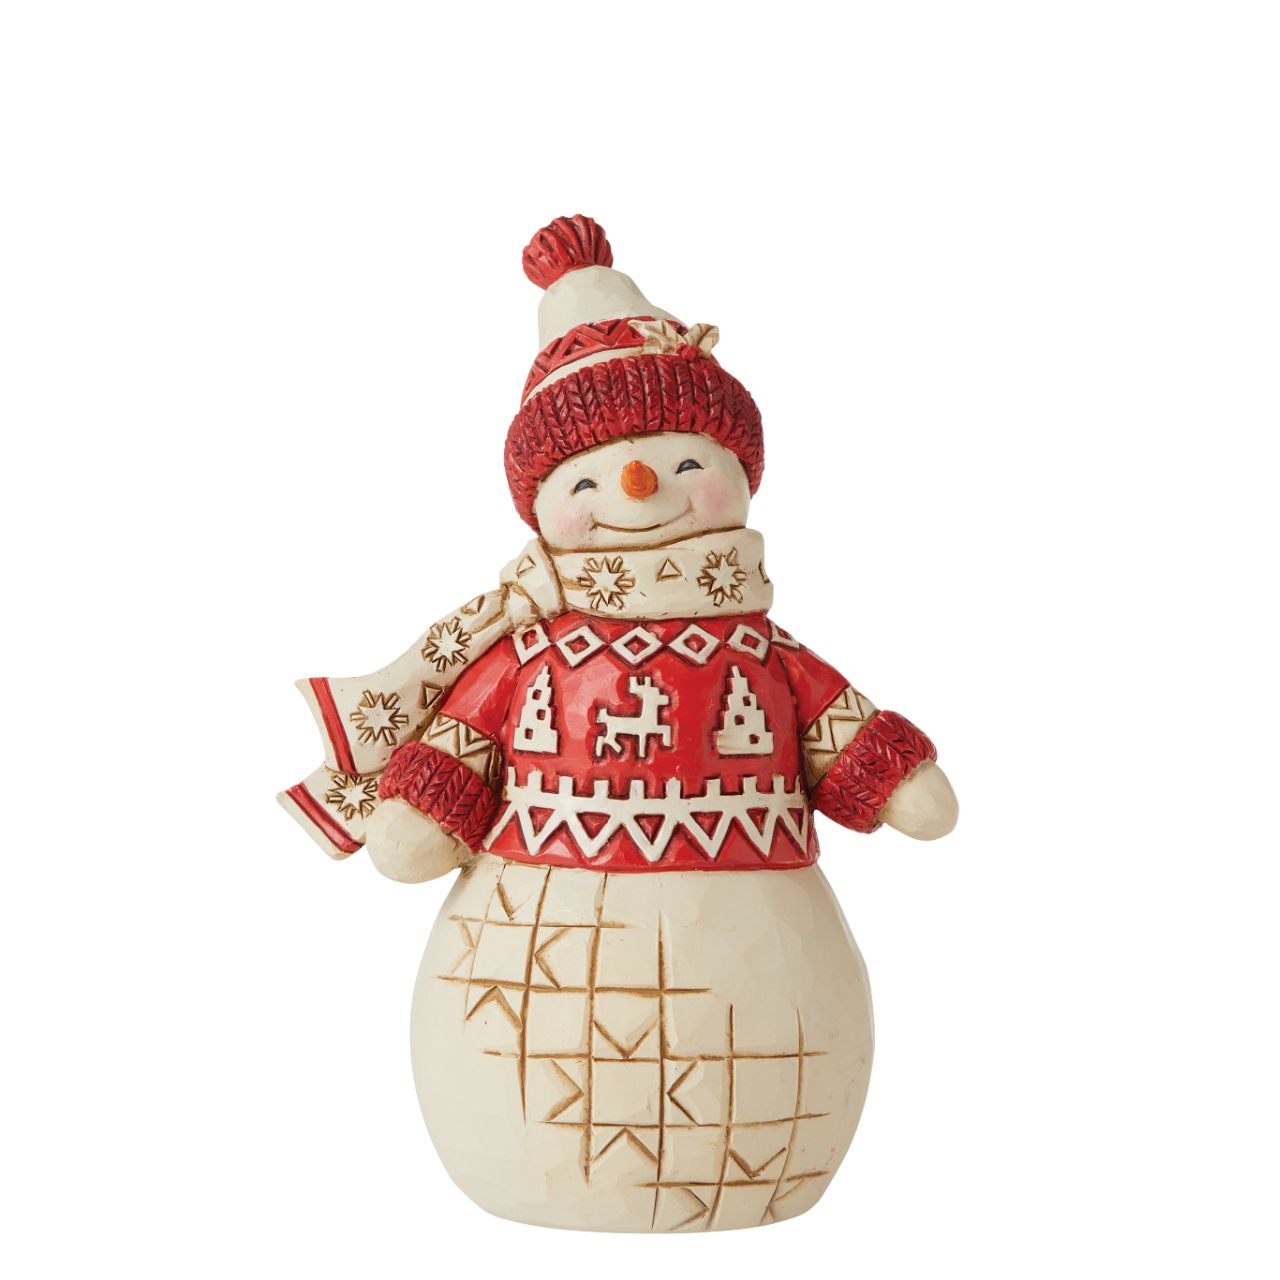 Jim Shore Nordic Noel Collection Snowman Figurine  The Nordic Noel Collection showcases a modern twist on Jim Shores whimsical designs; Contrasting red and white colours in Scandinavian patterns, turkey red and Danish architectural trim.